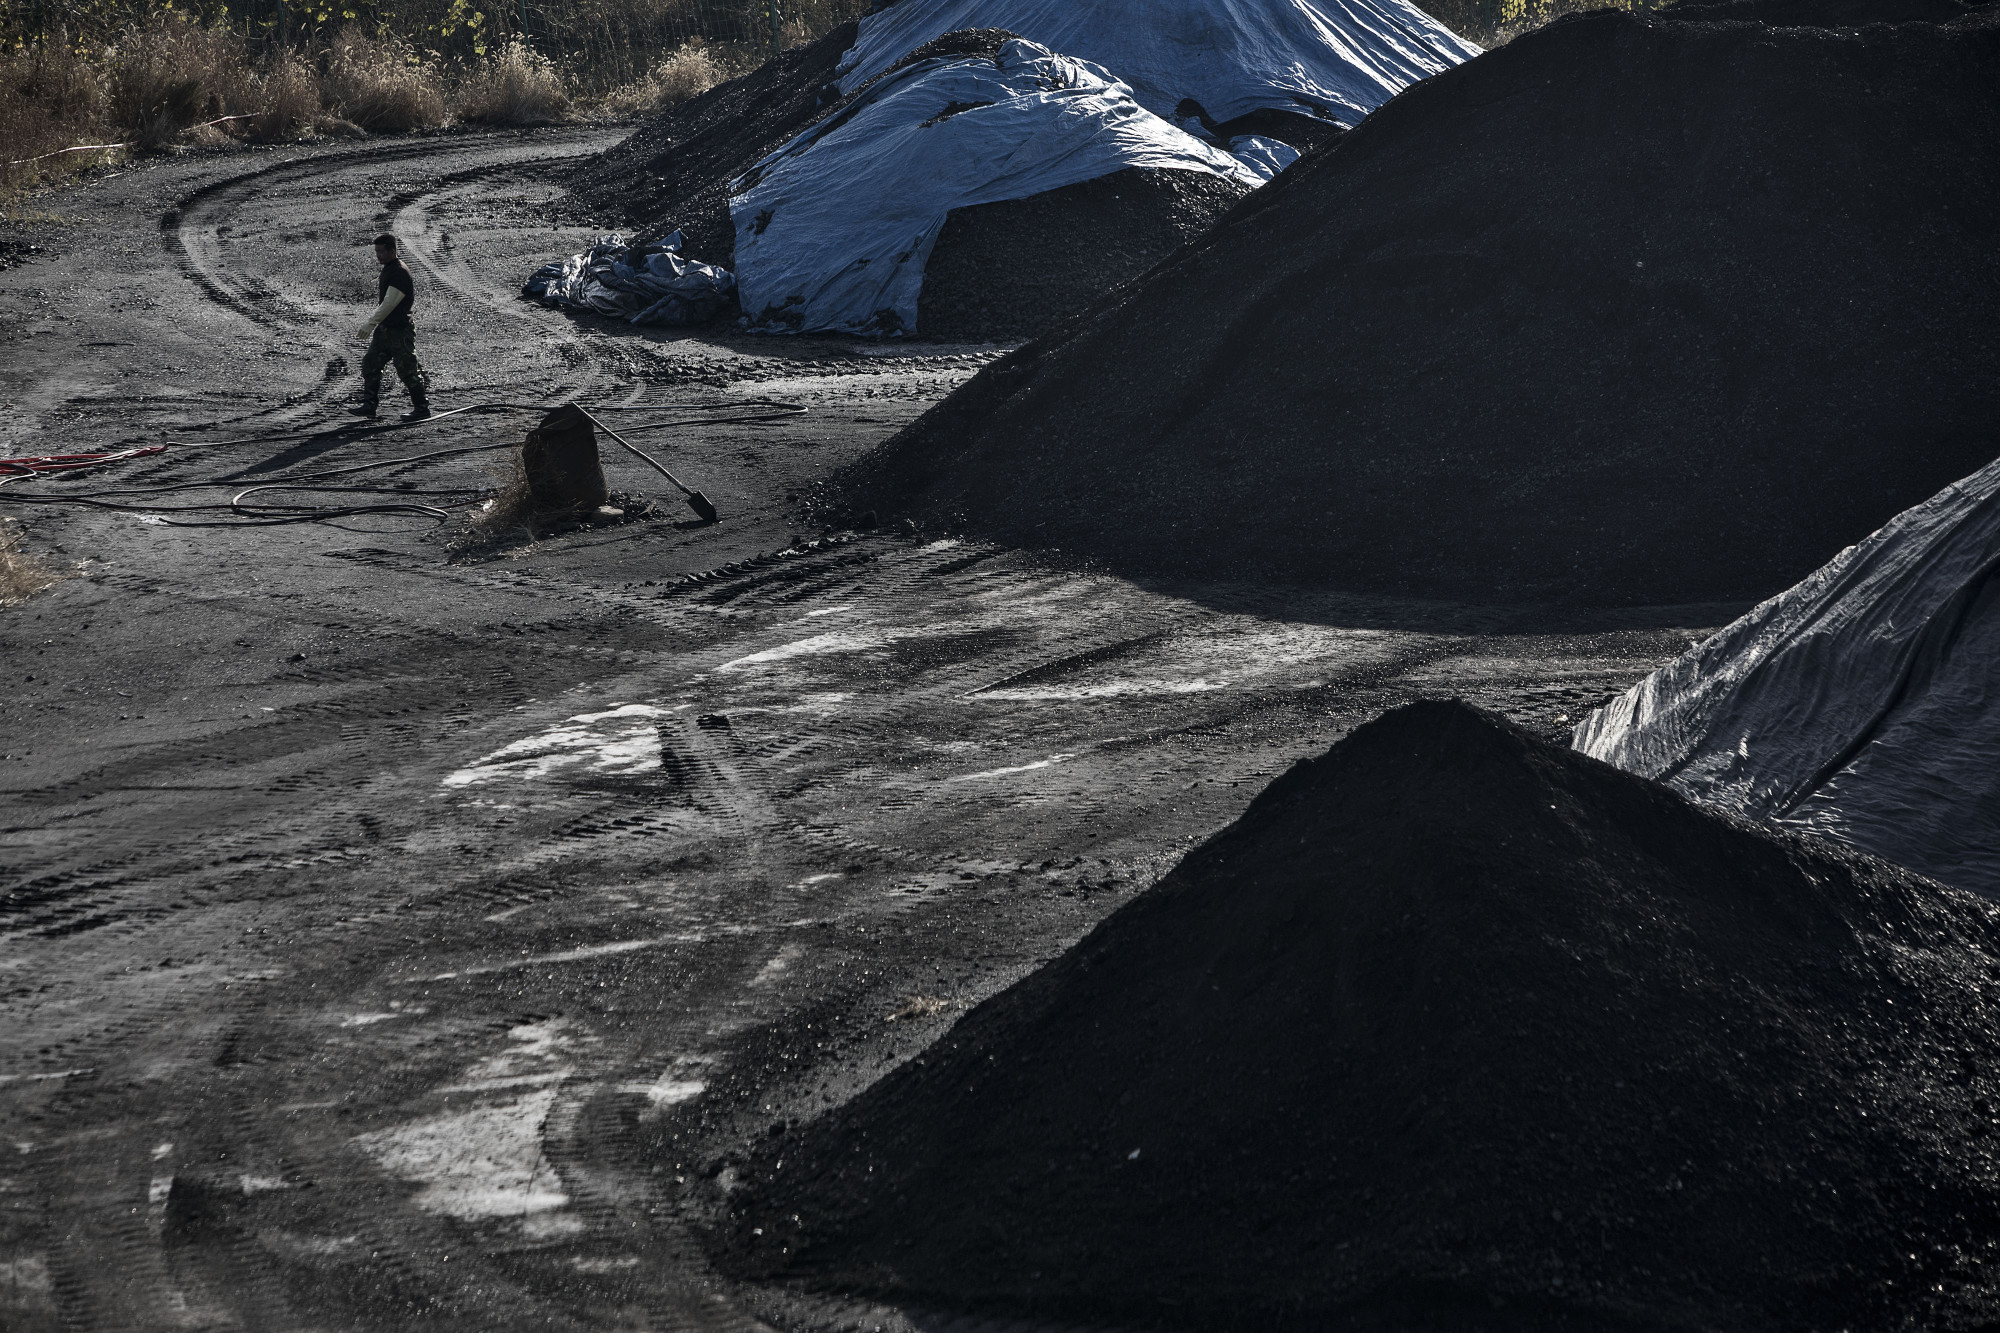 A man walks past piles of coal at the Qinhuangdao Port in Qinhuangdao, China.